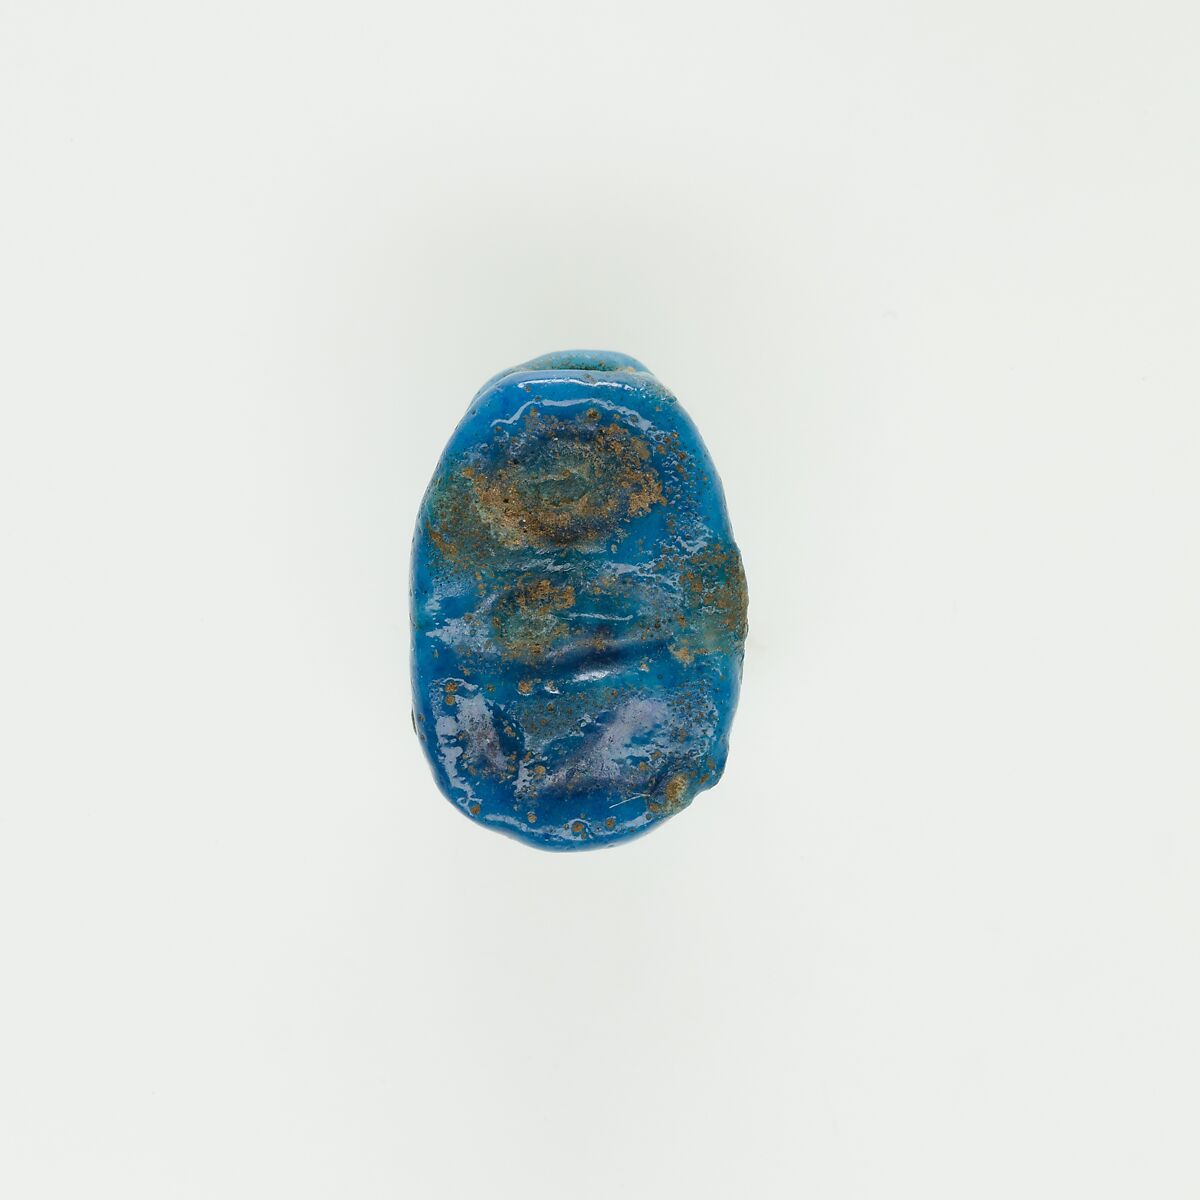 Scarab Inscribed with a Blessing Related to Re, Bright blue faience 